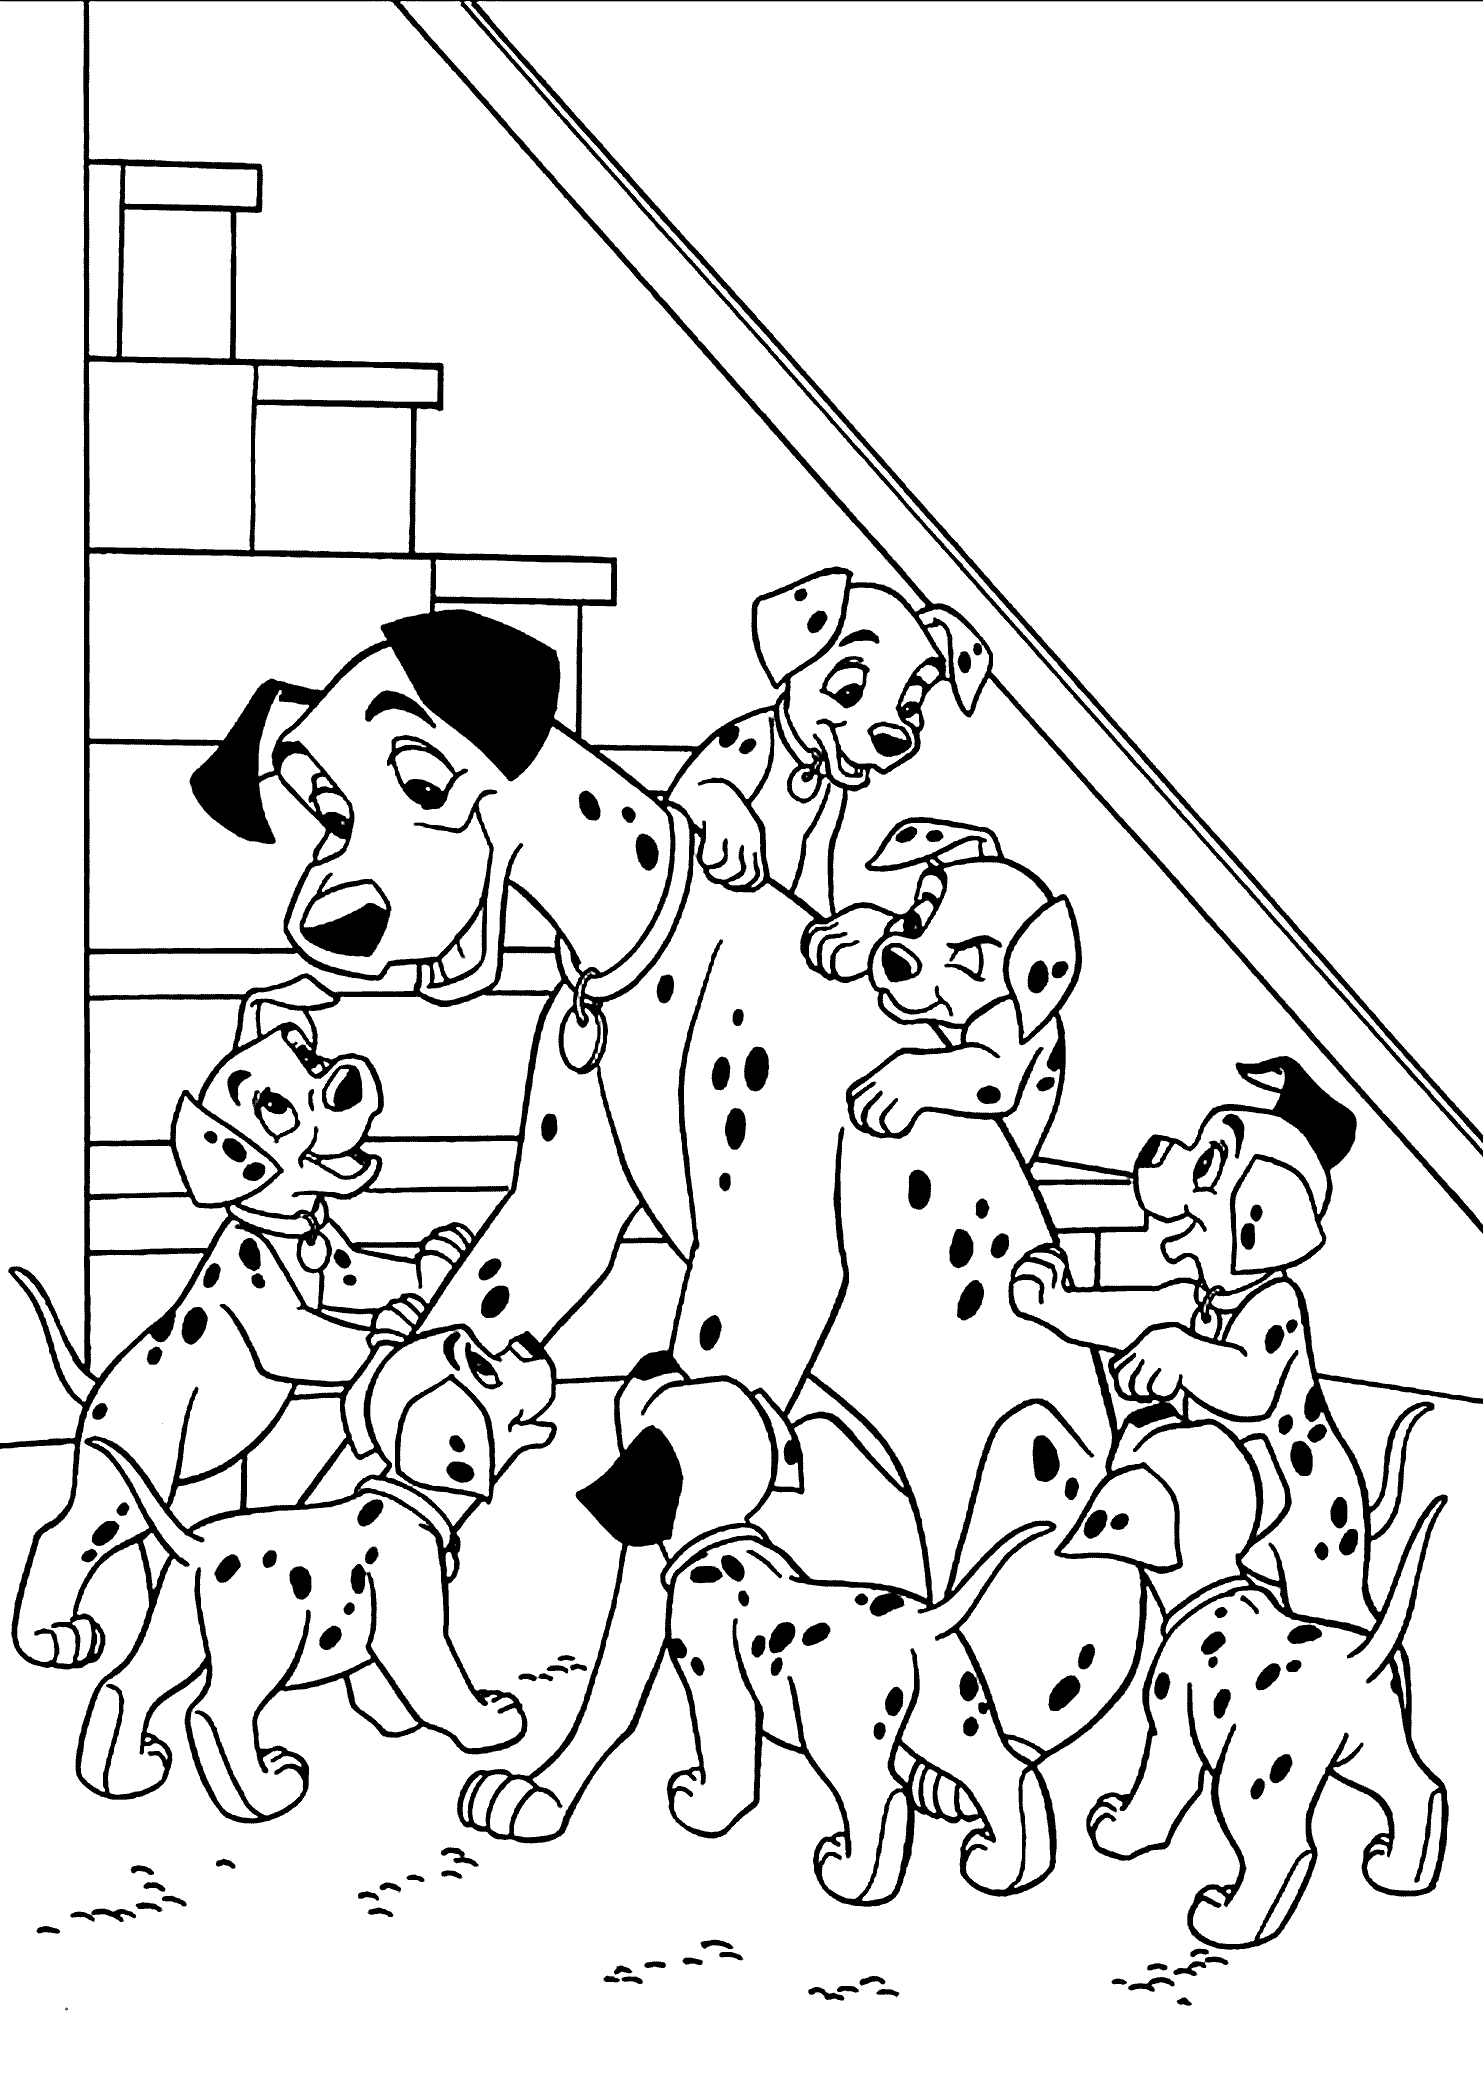 14 101 dalmatians coloring page to print - Print Color Craft